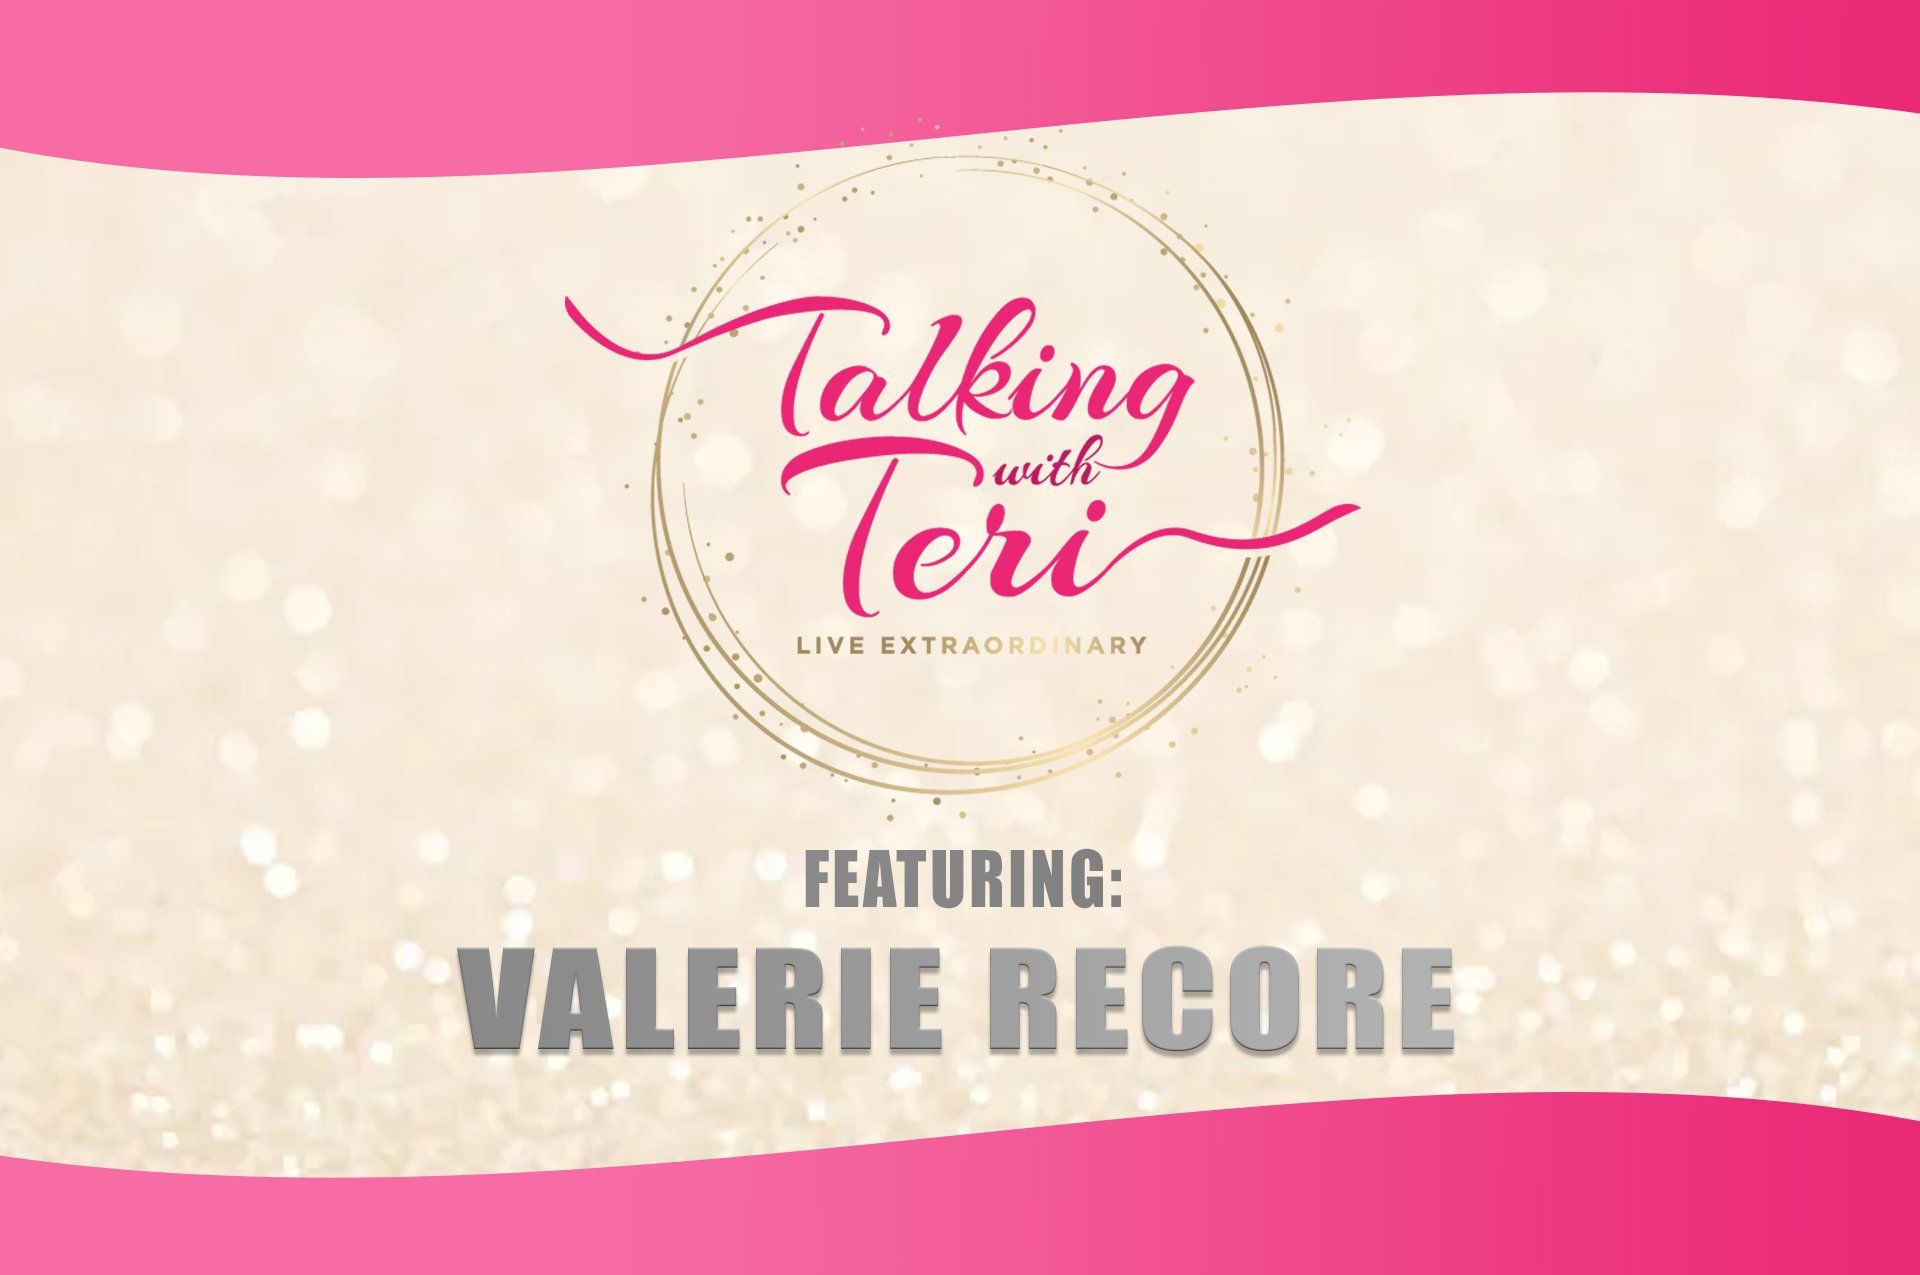 Talking With Teri and Valerie Recore